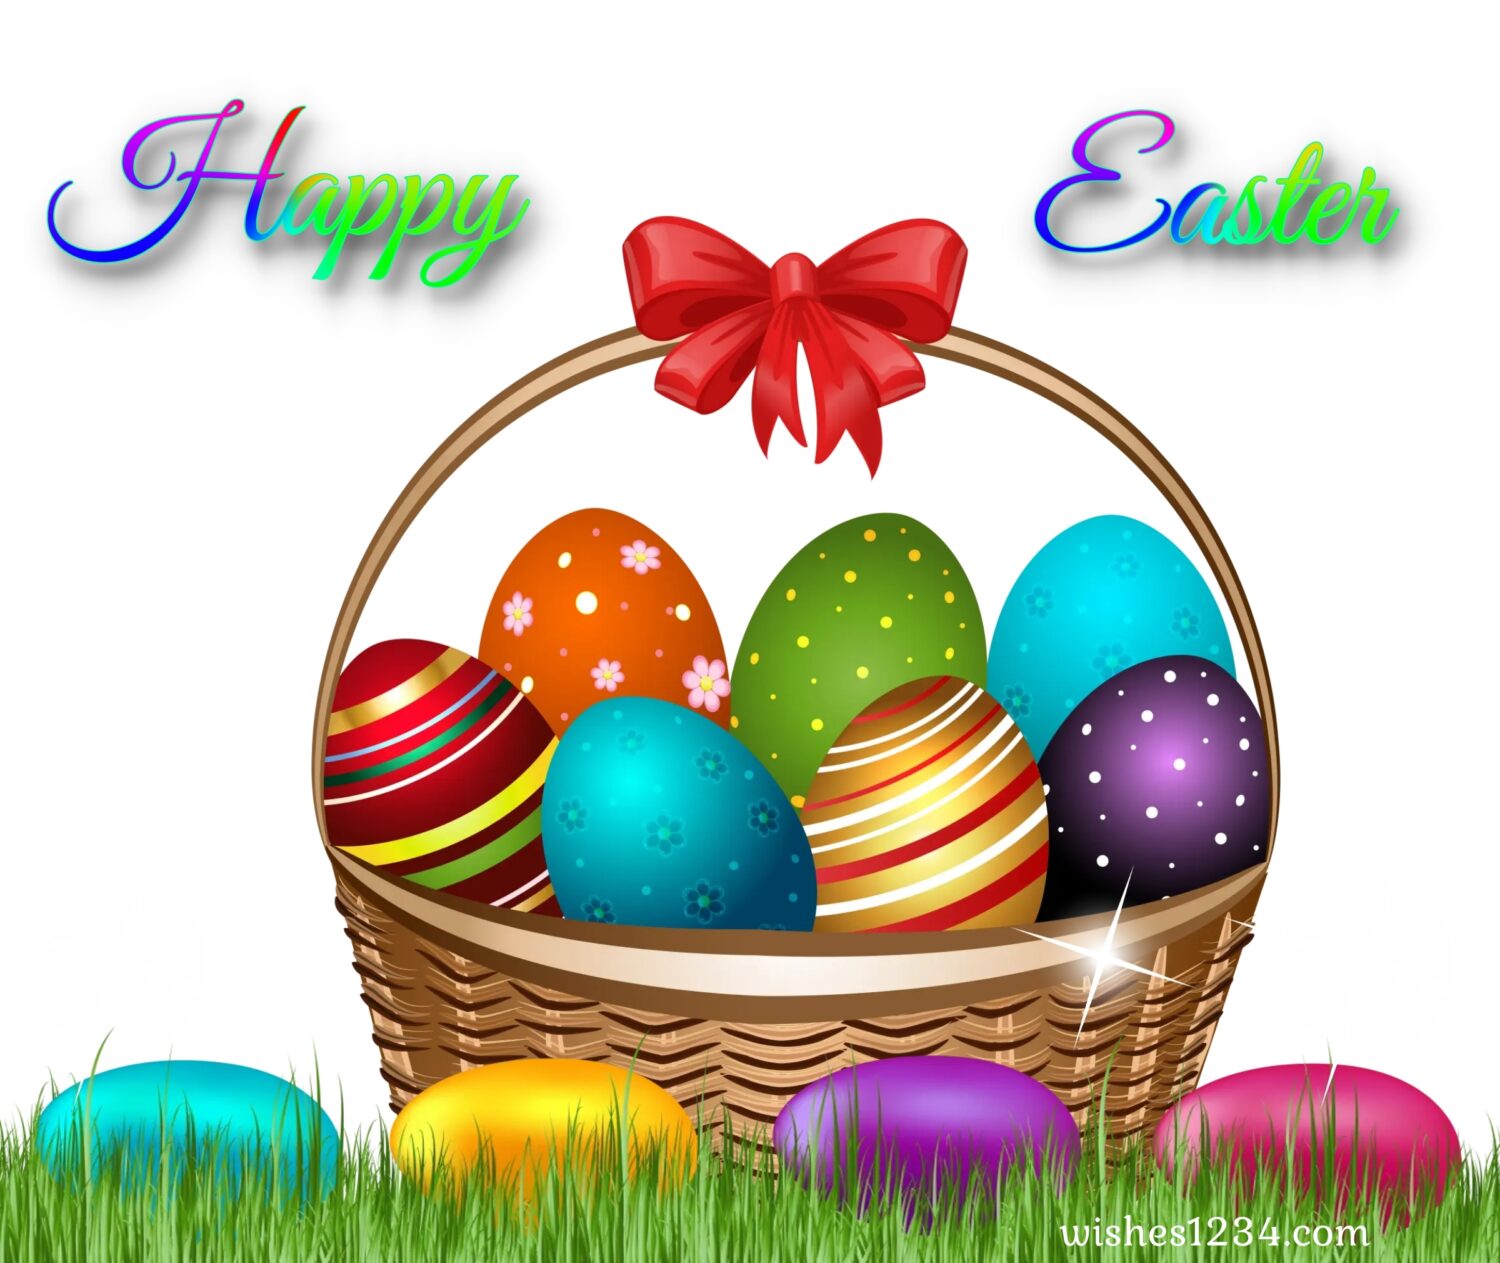 Easter basket with eggs, Happy Easter Wishes, Quotes & Images.